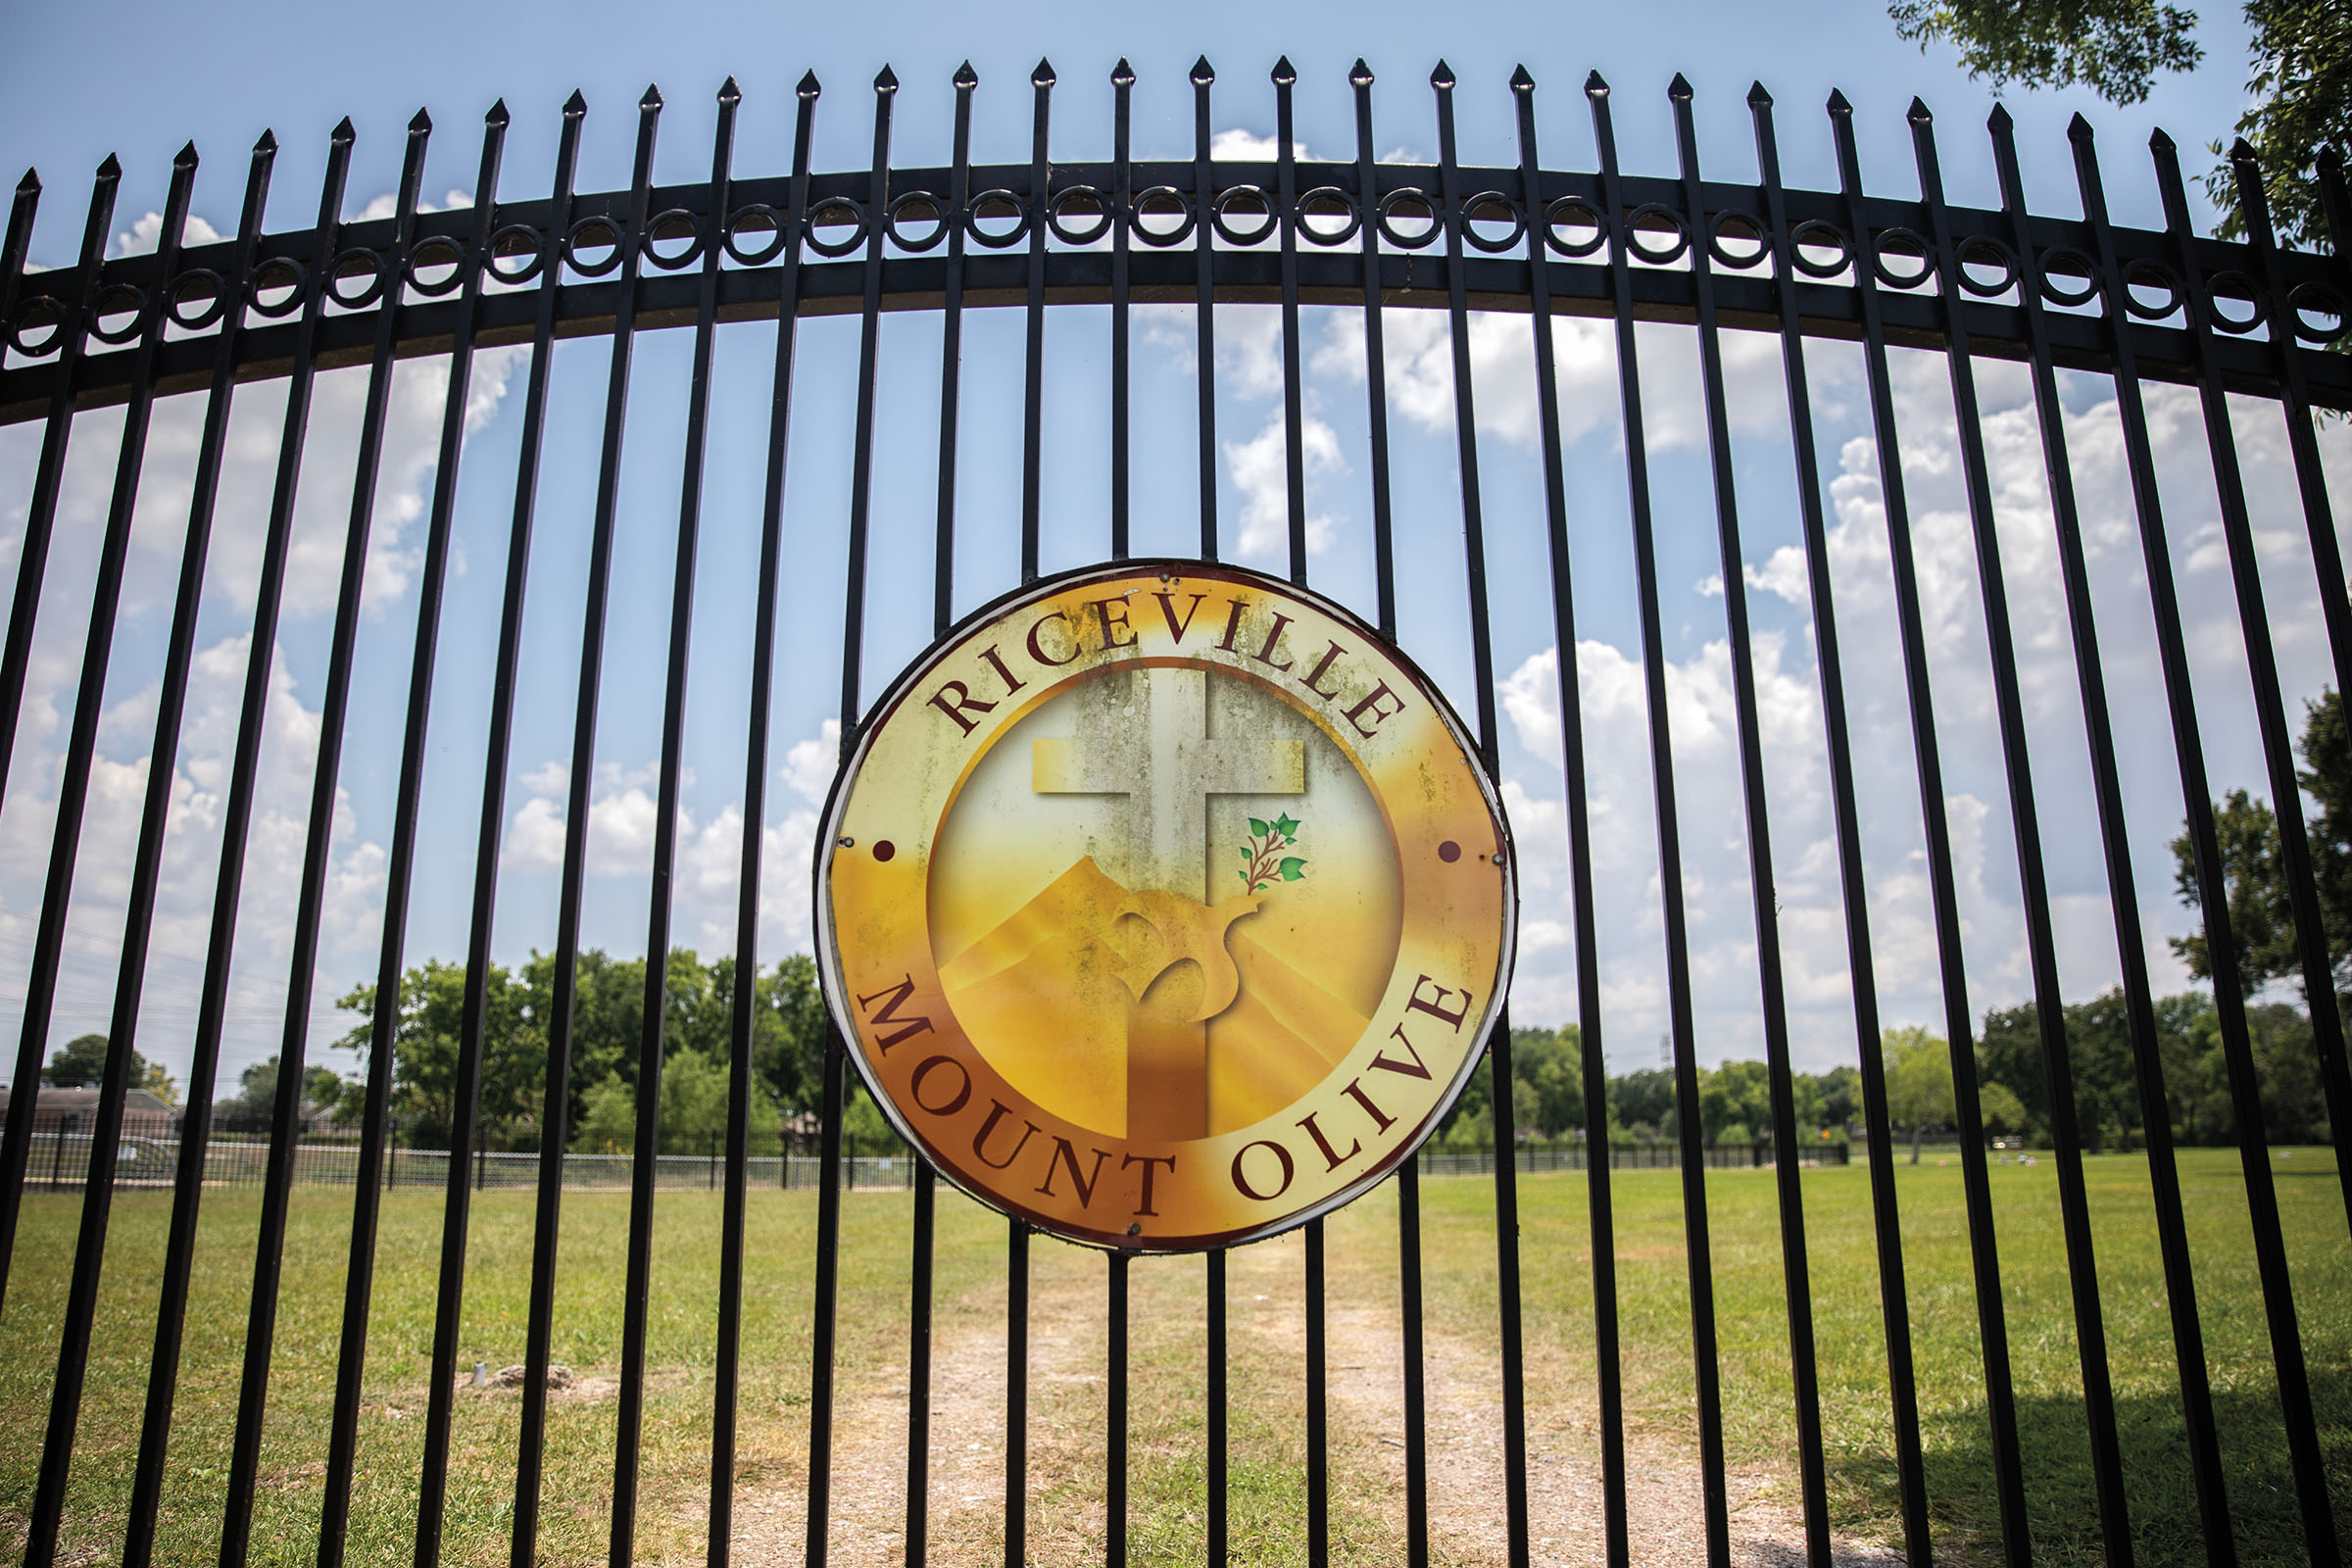 A golden circular sign sits outside of a black-gated cemetery